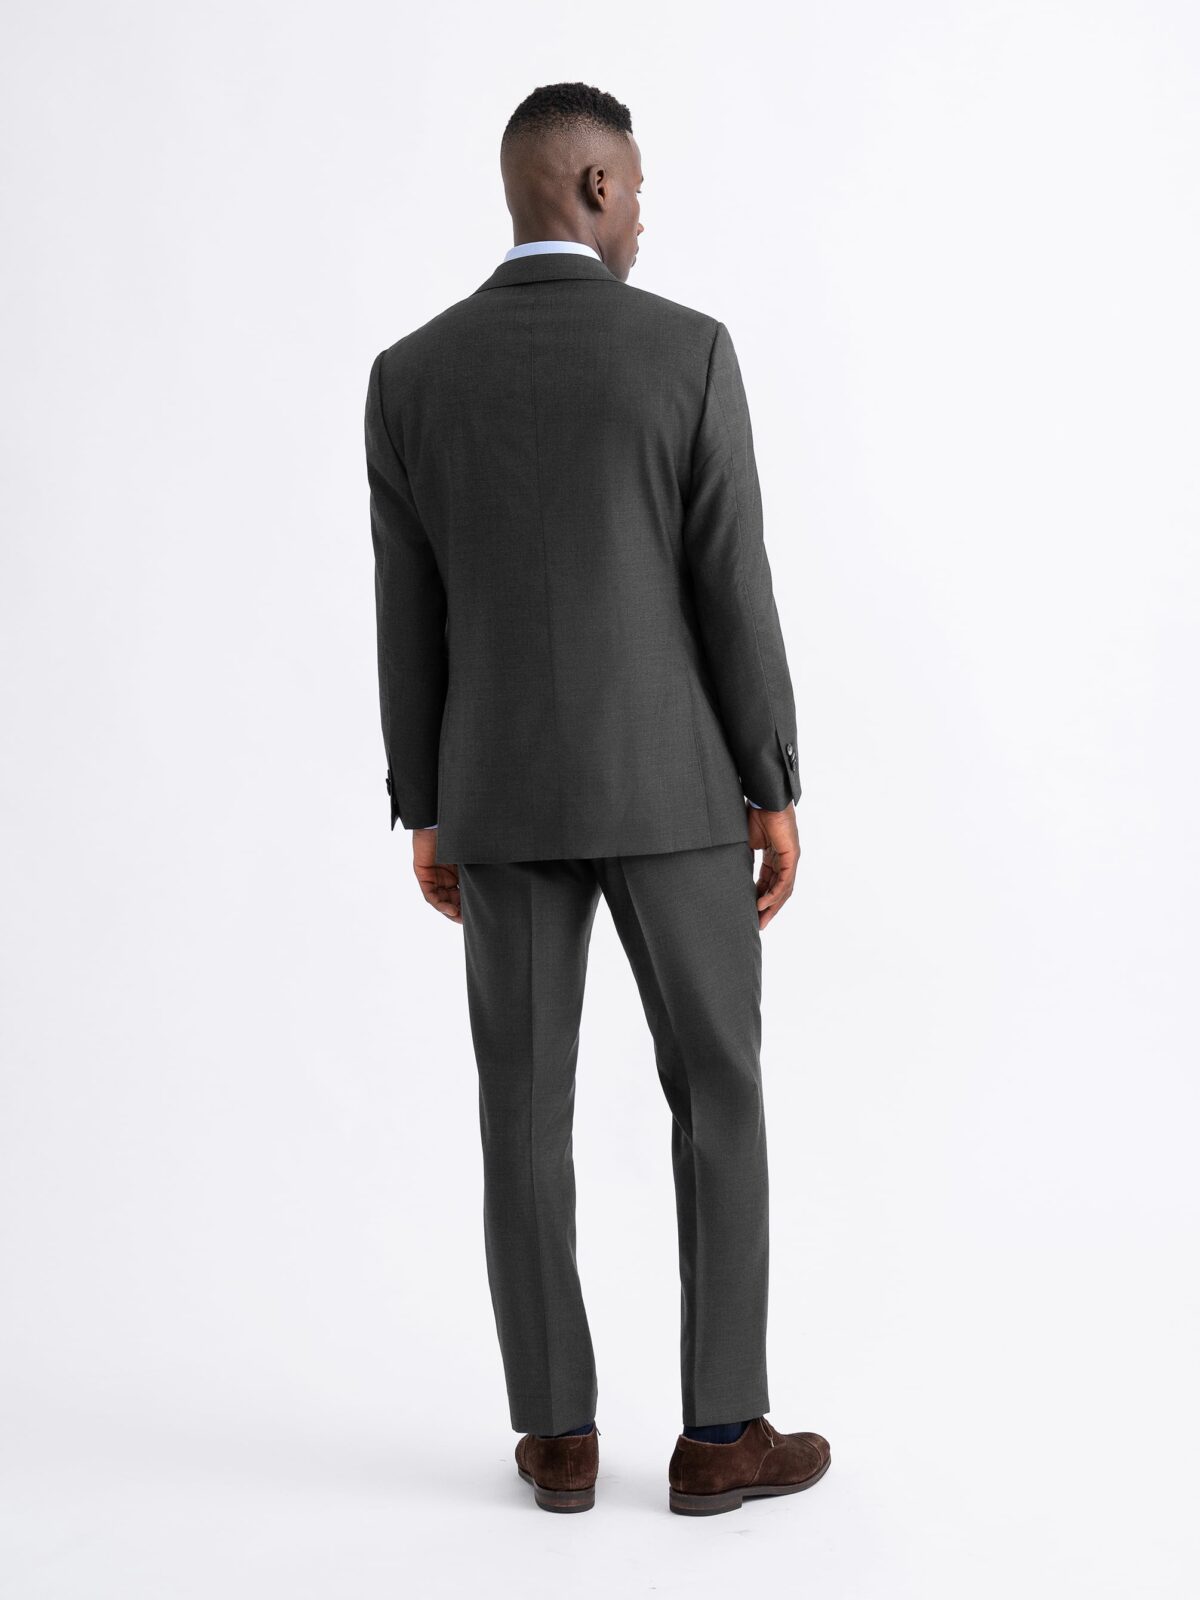 Grey Melange Allen Suit with Side Tab Dress Pants - Custom Fit Tailored  Clothing